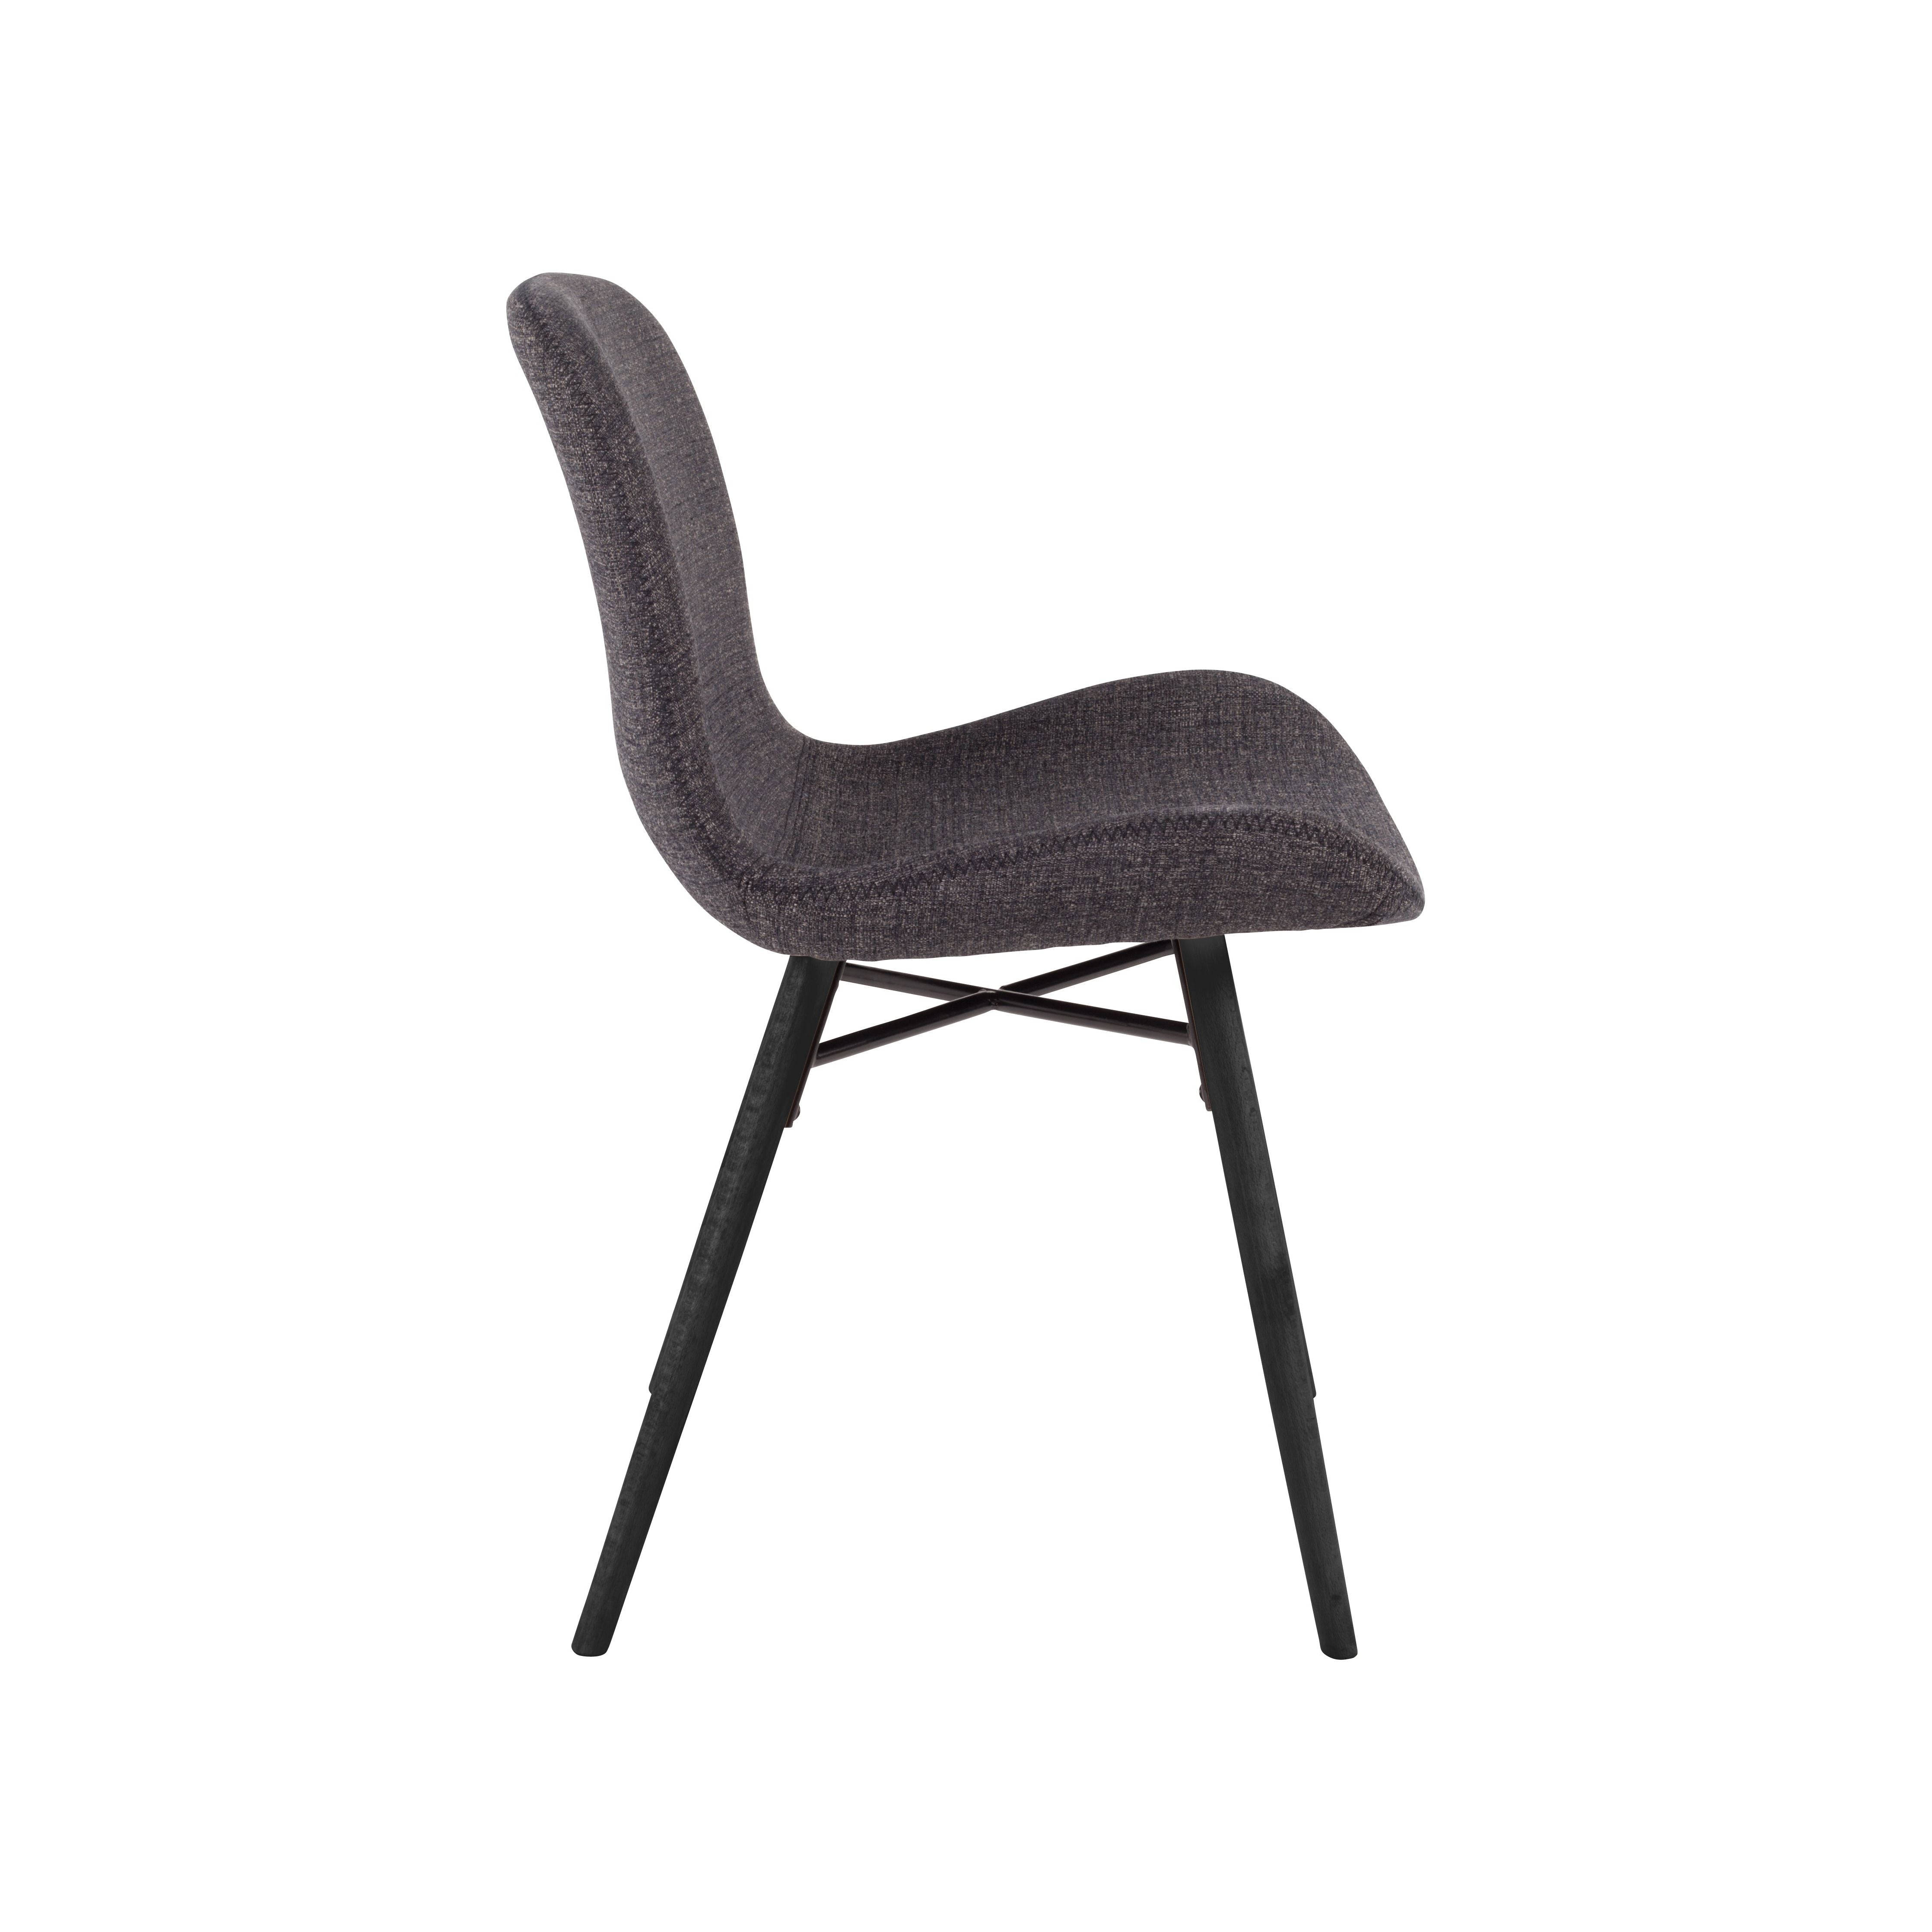 Chair lester anthracite | 2 pieces